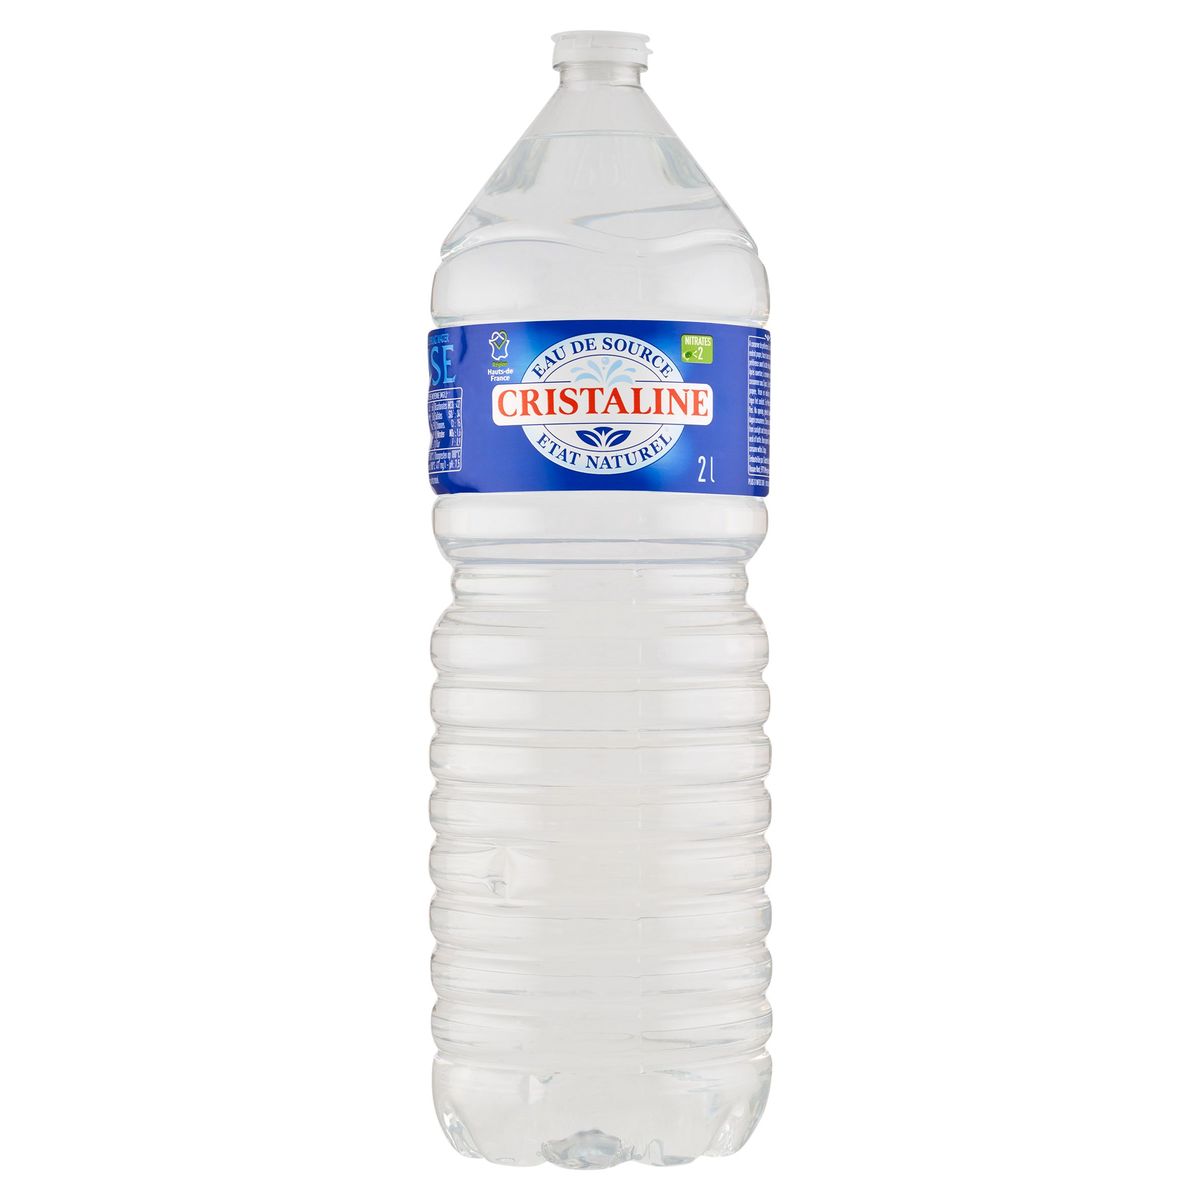 Cristaline Bronwater Louise 2 L